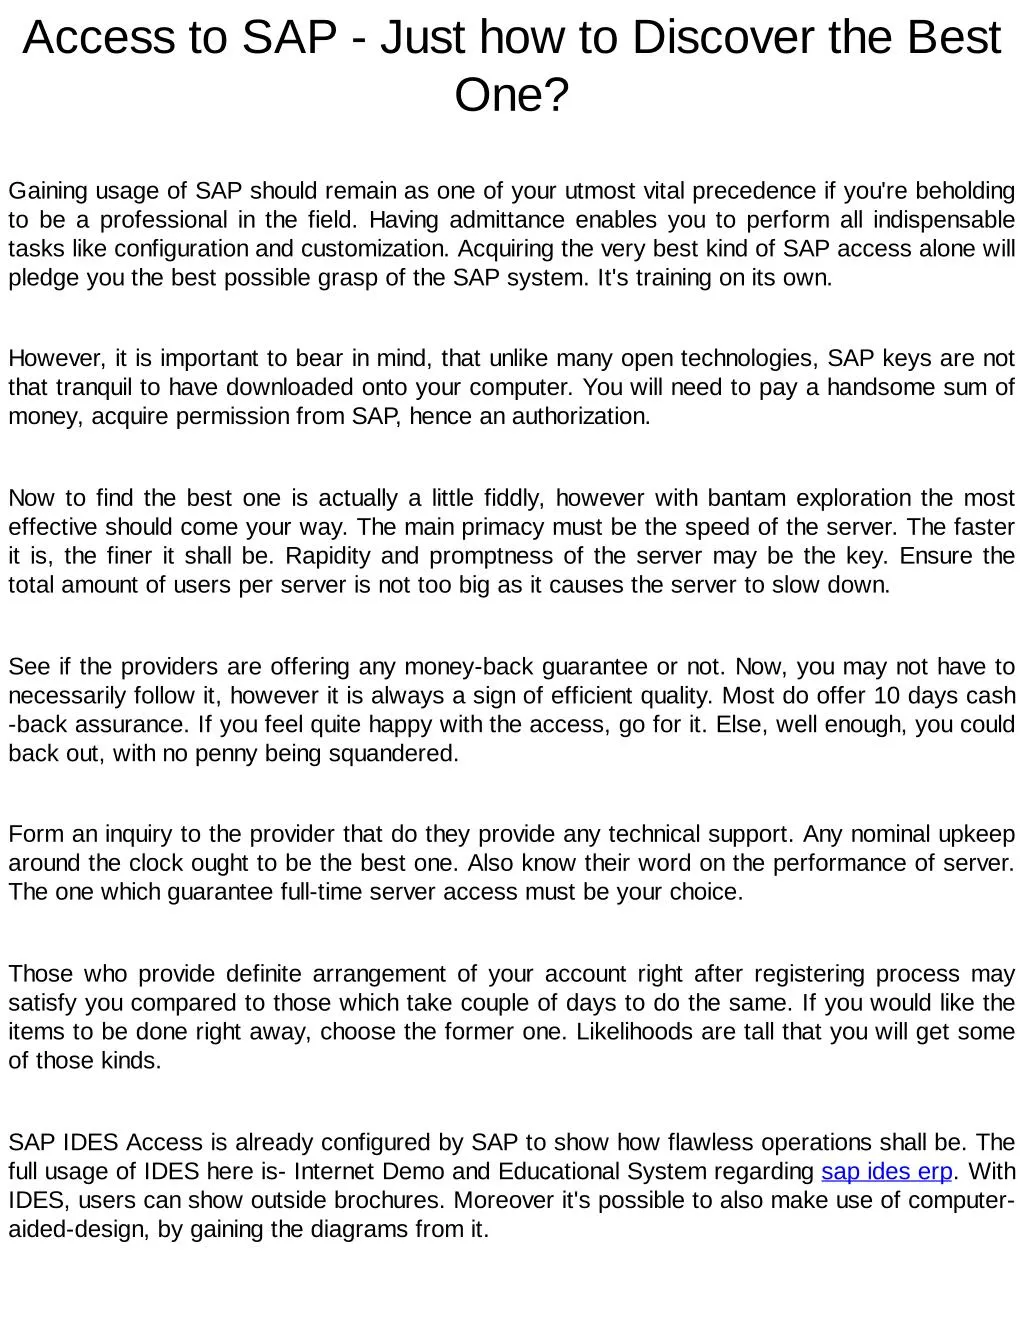 access to sap just how to discover the best one